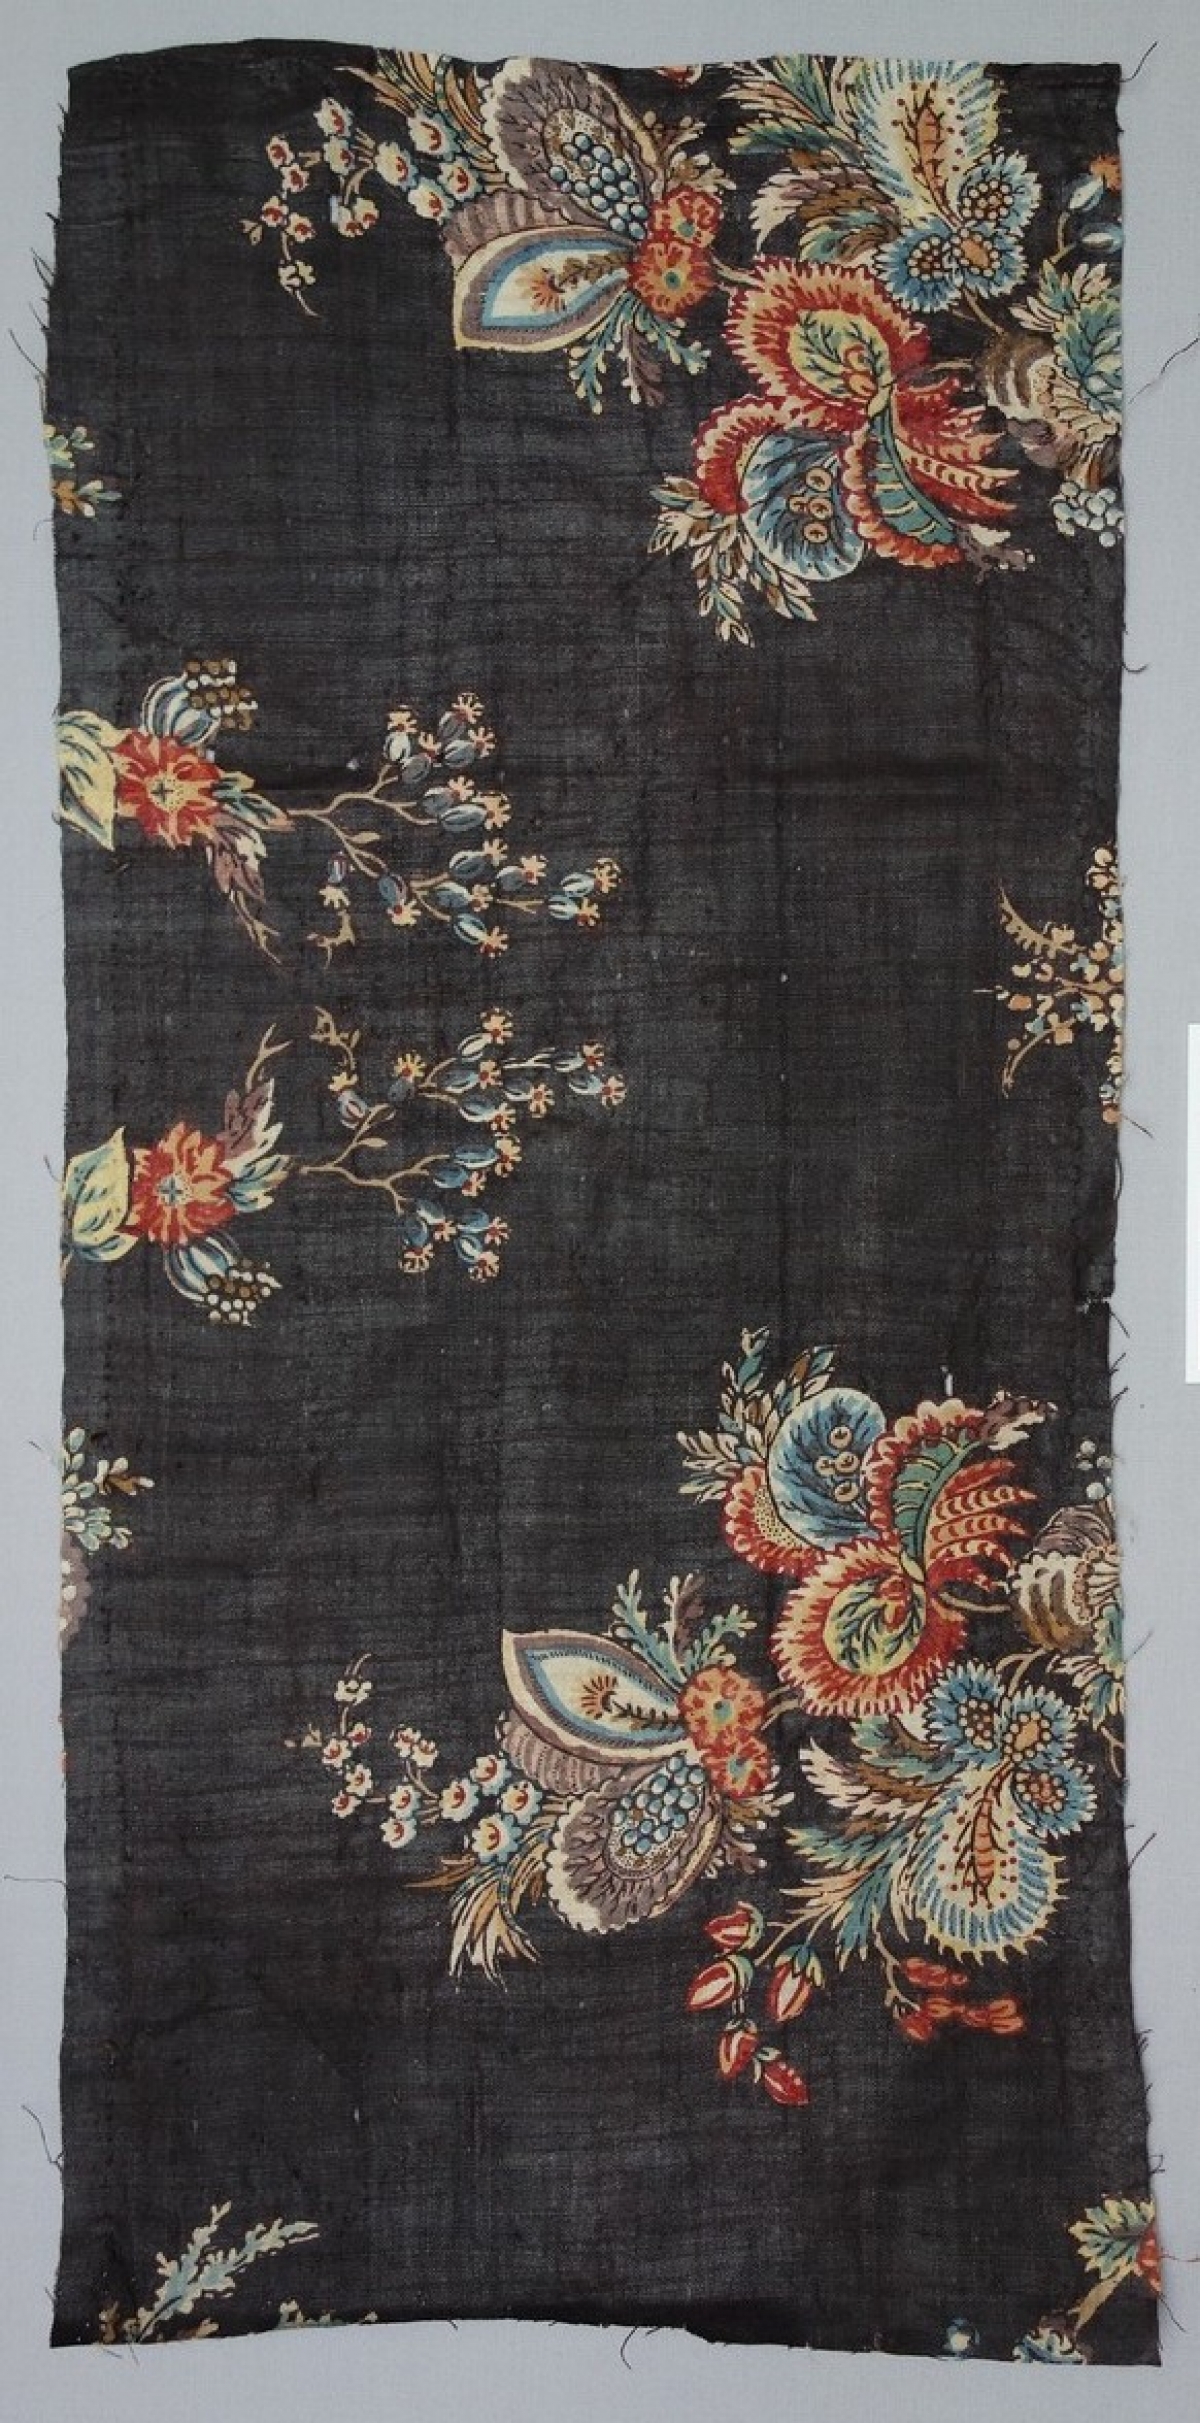 Sample of a French copy of an Indian chintz, c. 1900.